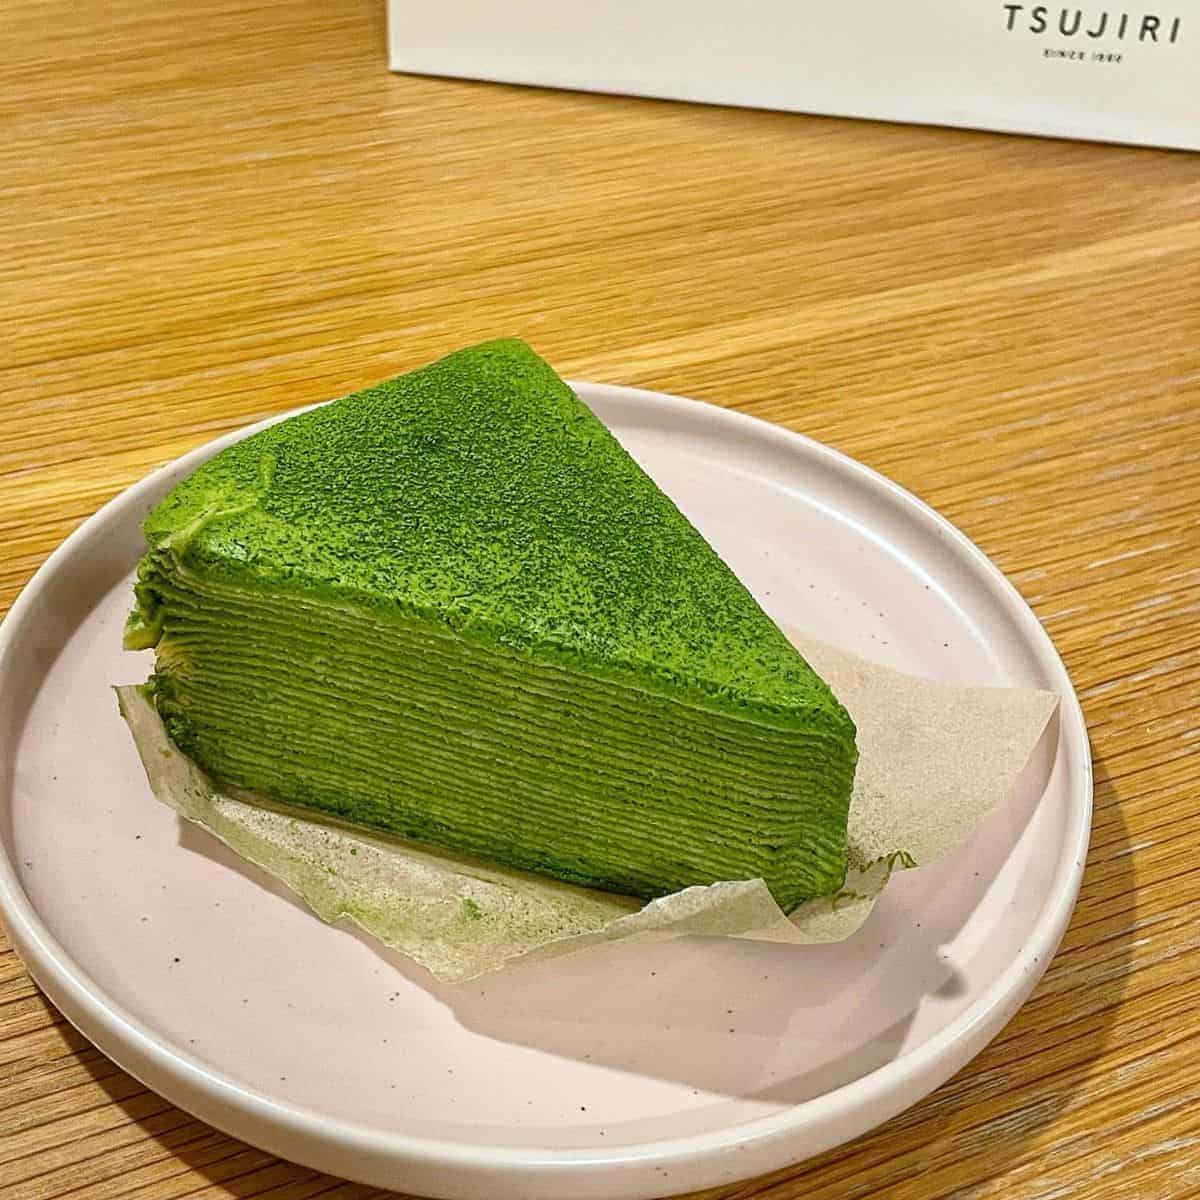 A delectable slice of Matcha Crepe Cake with beautiful green hue placed in a white ceramic plate